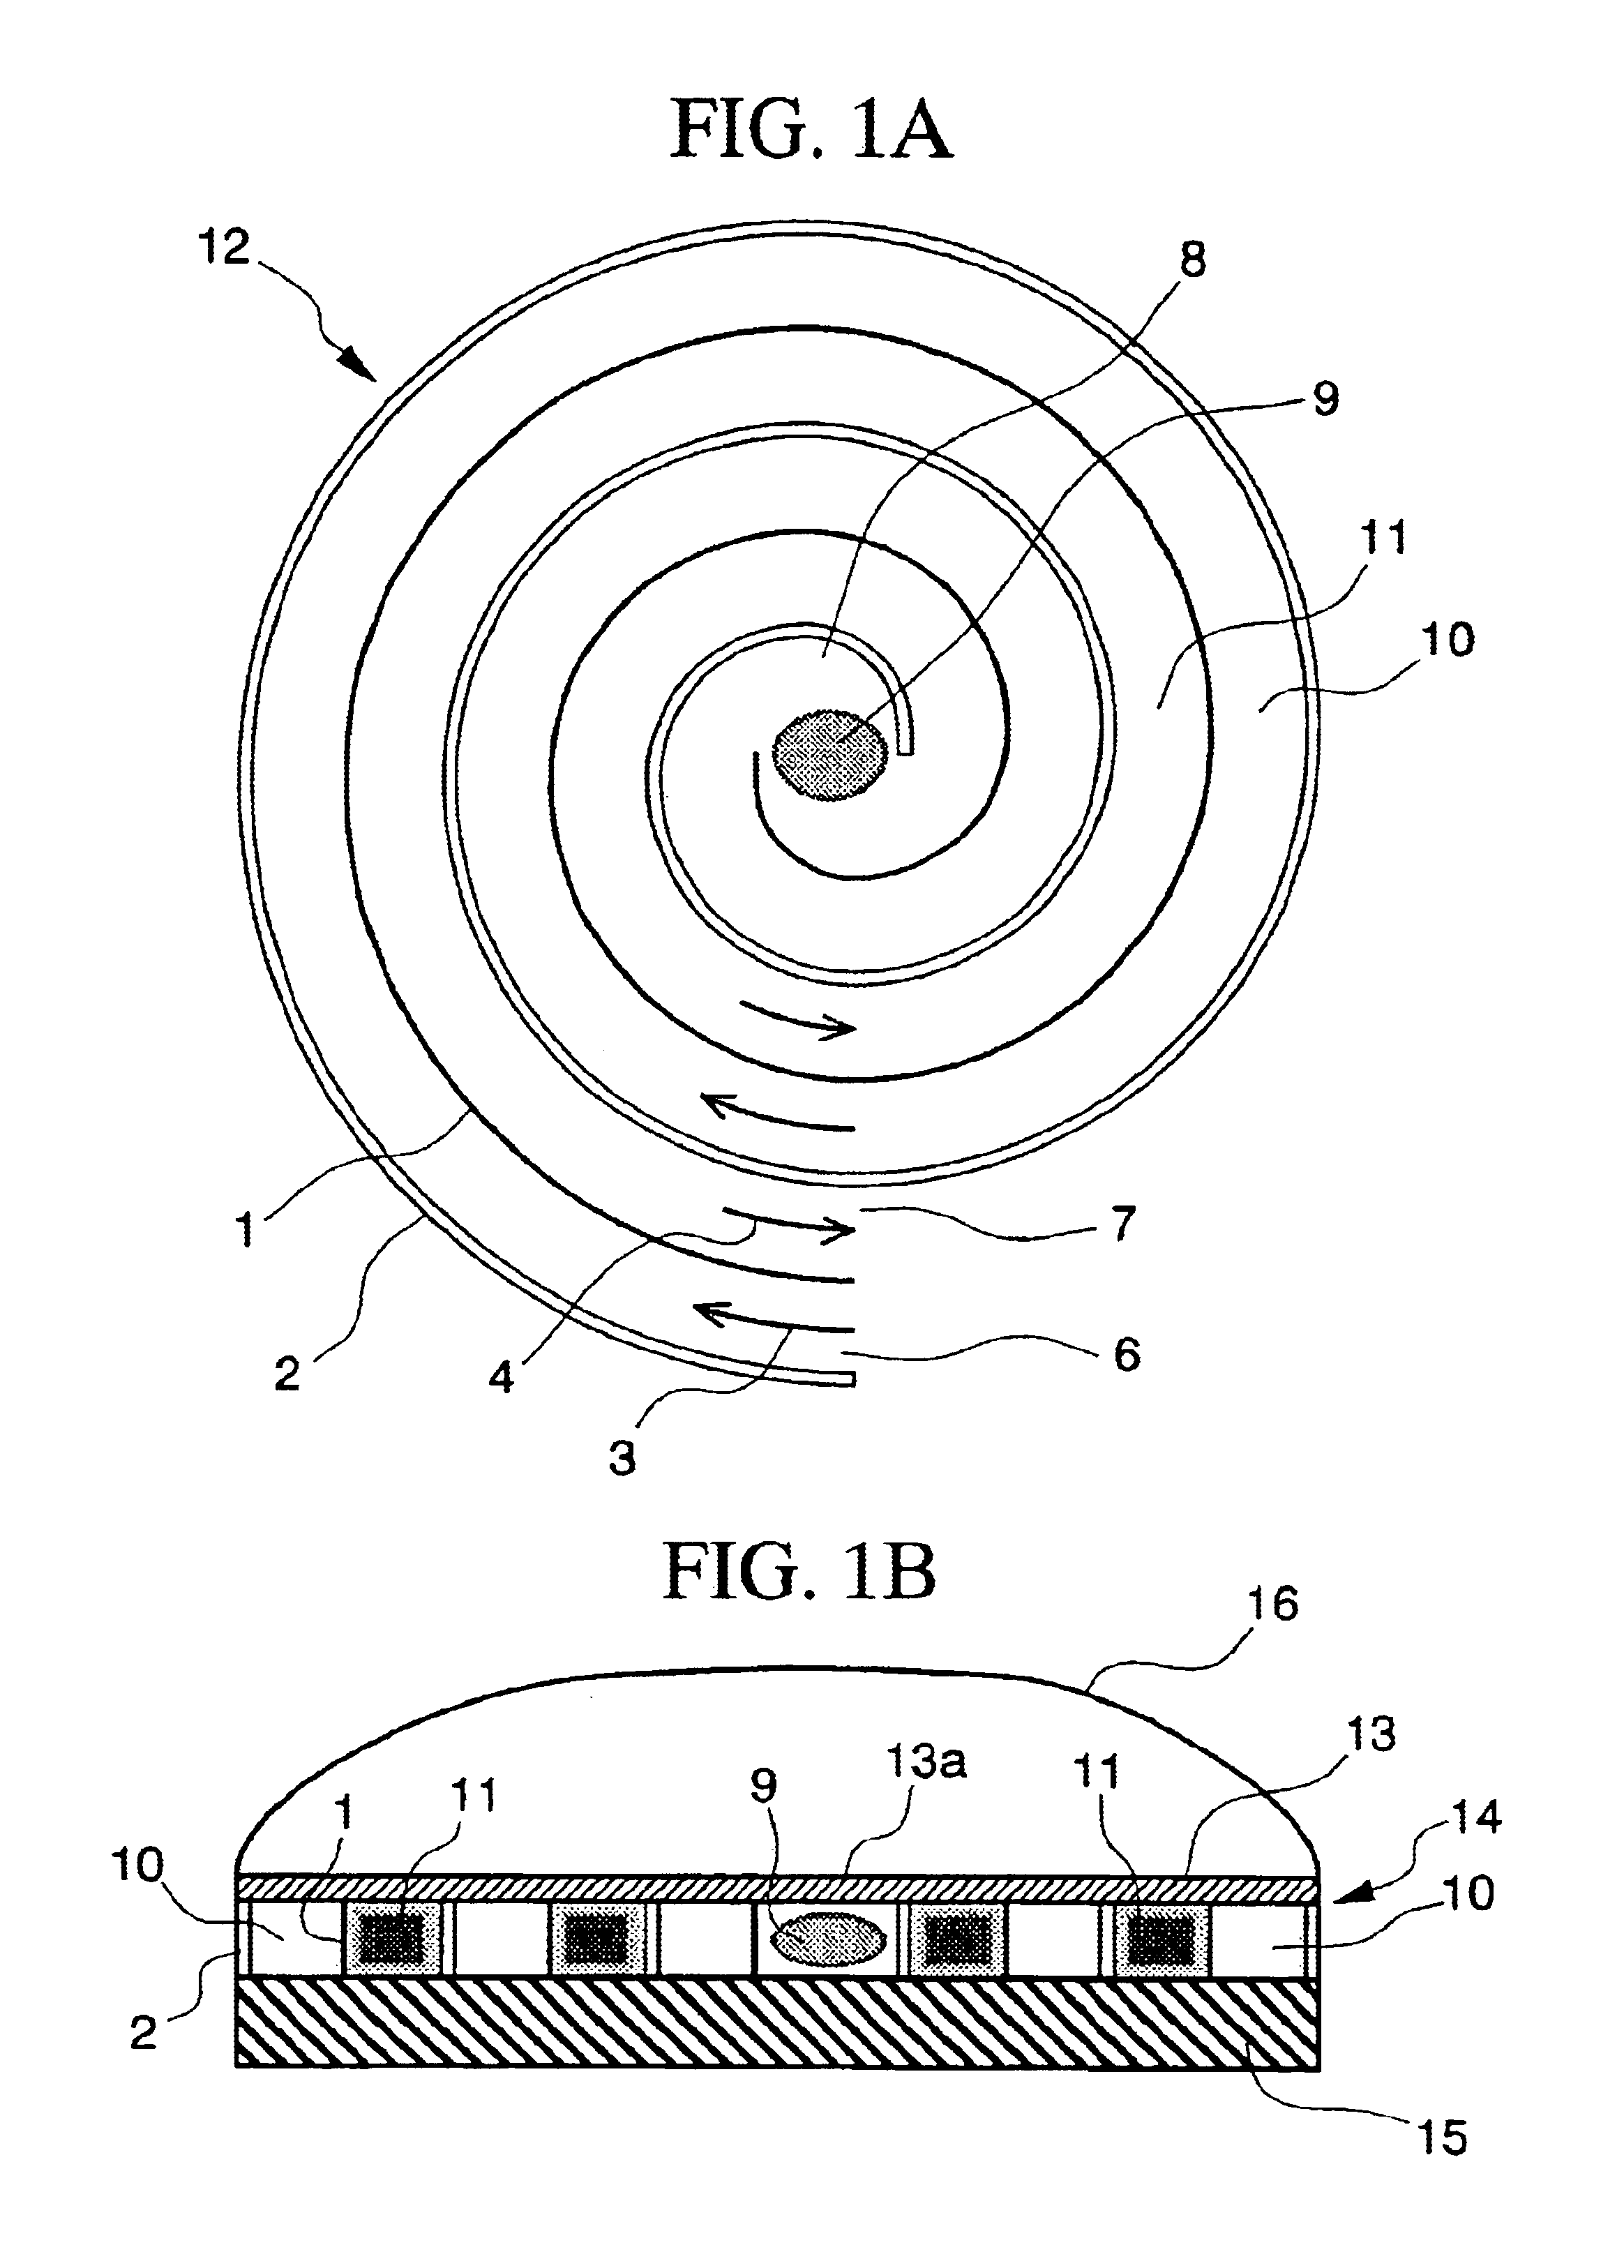 Microcombustion heater having heating surface which emits radiant heat